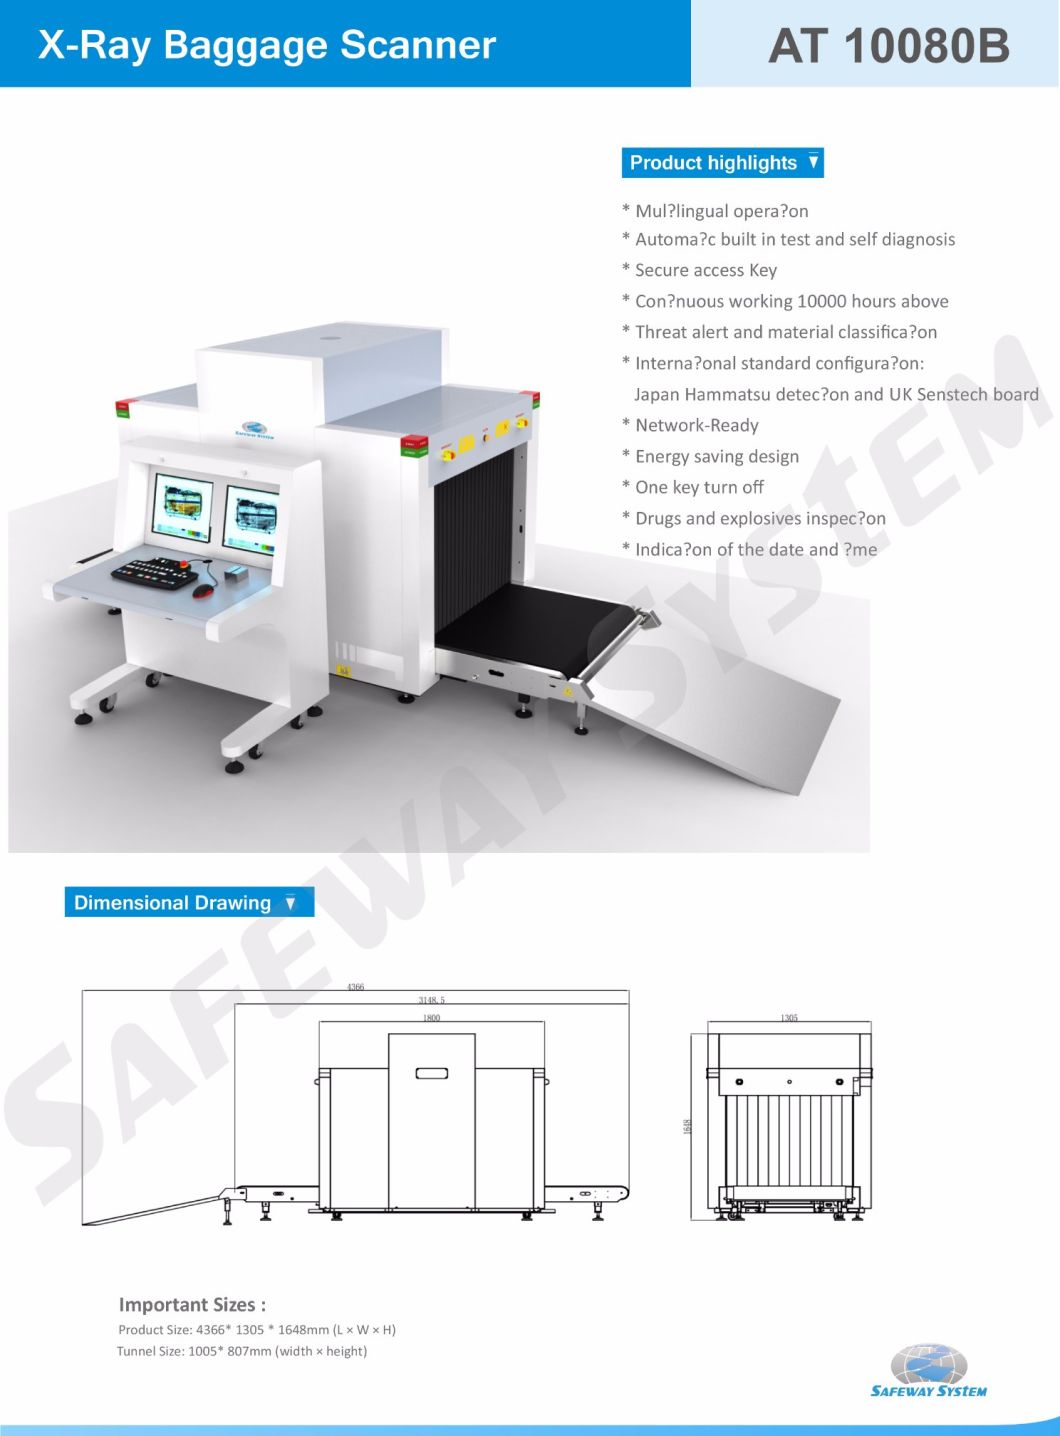 Big Baggage, Luggage, Cargo, Parcel X-ray Scanner for Airport